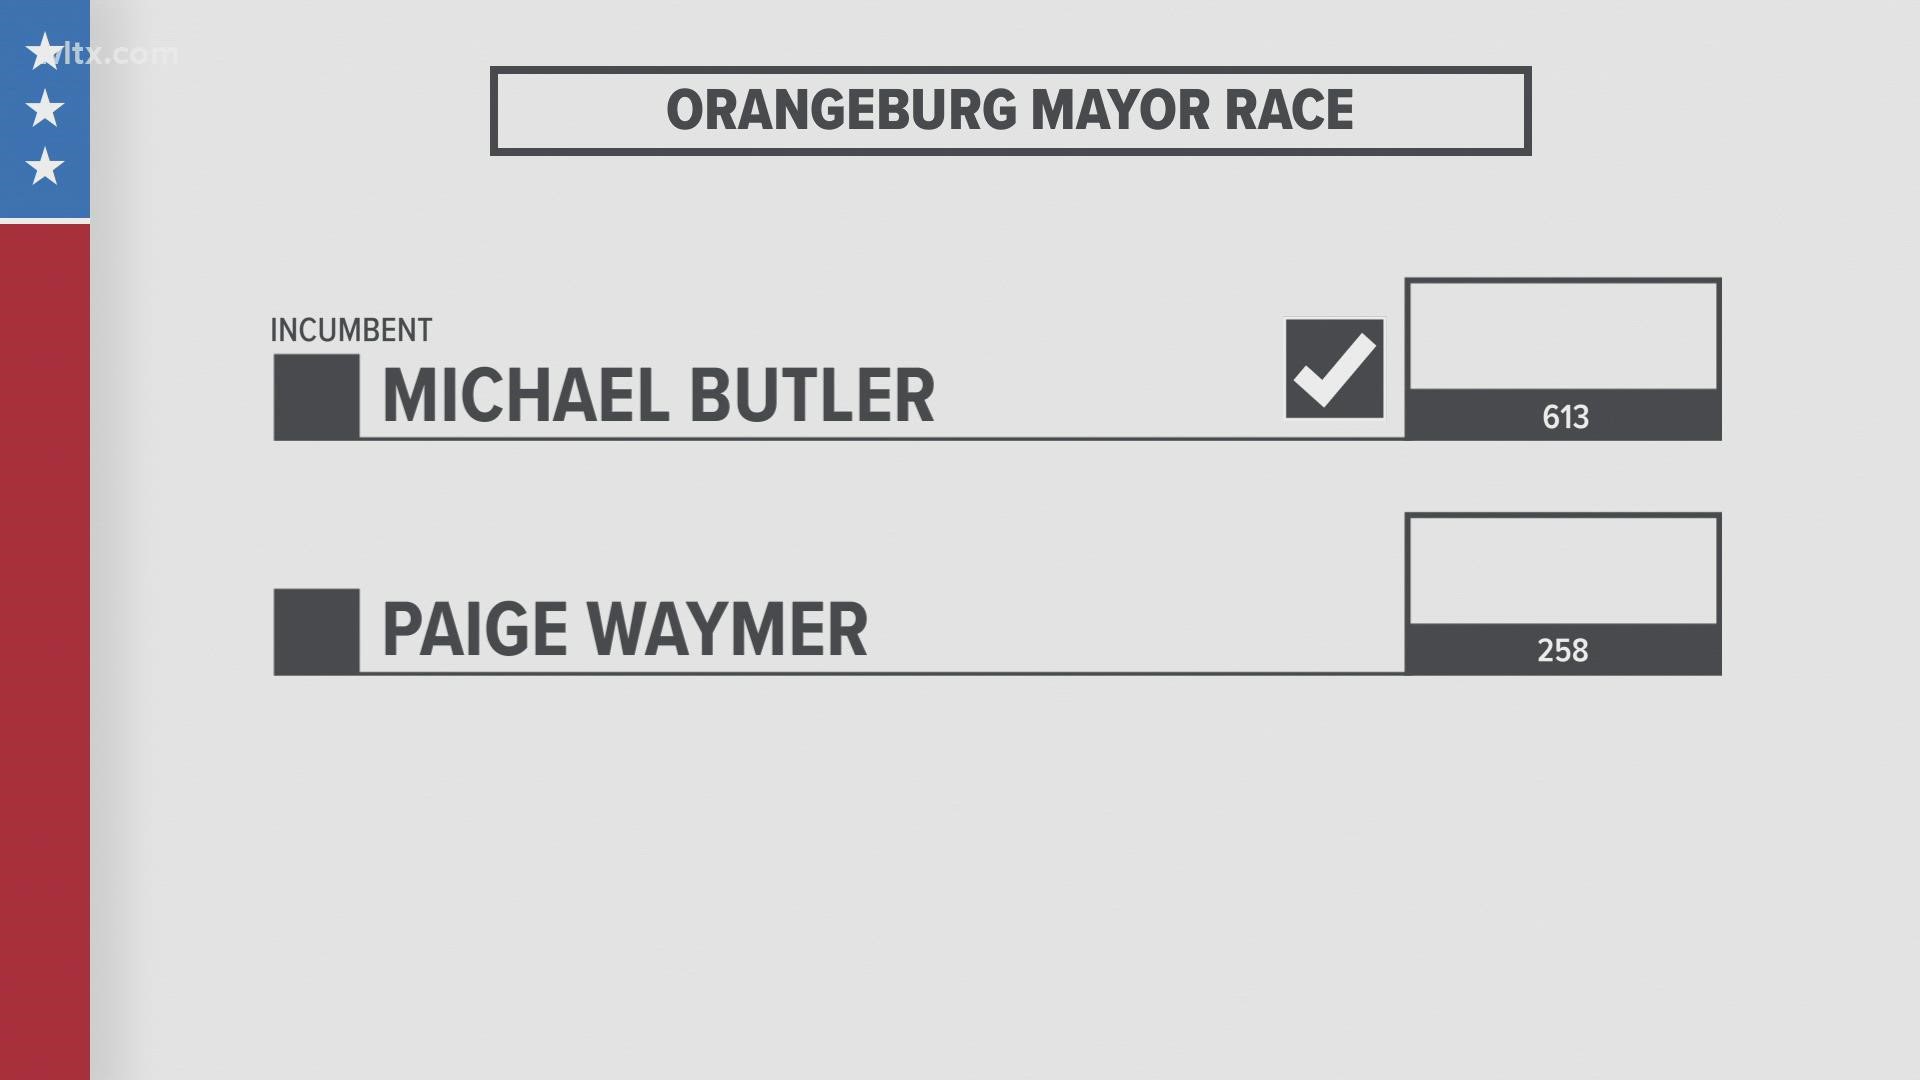 Voters in the City of Orangeburg have given Mayor Michael C. Butler another term in office.